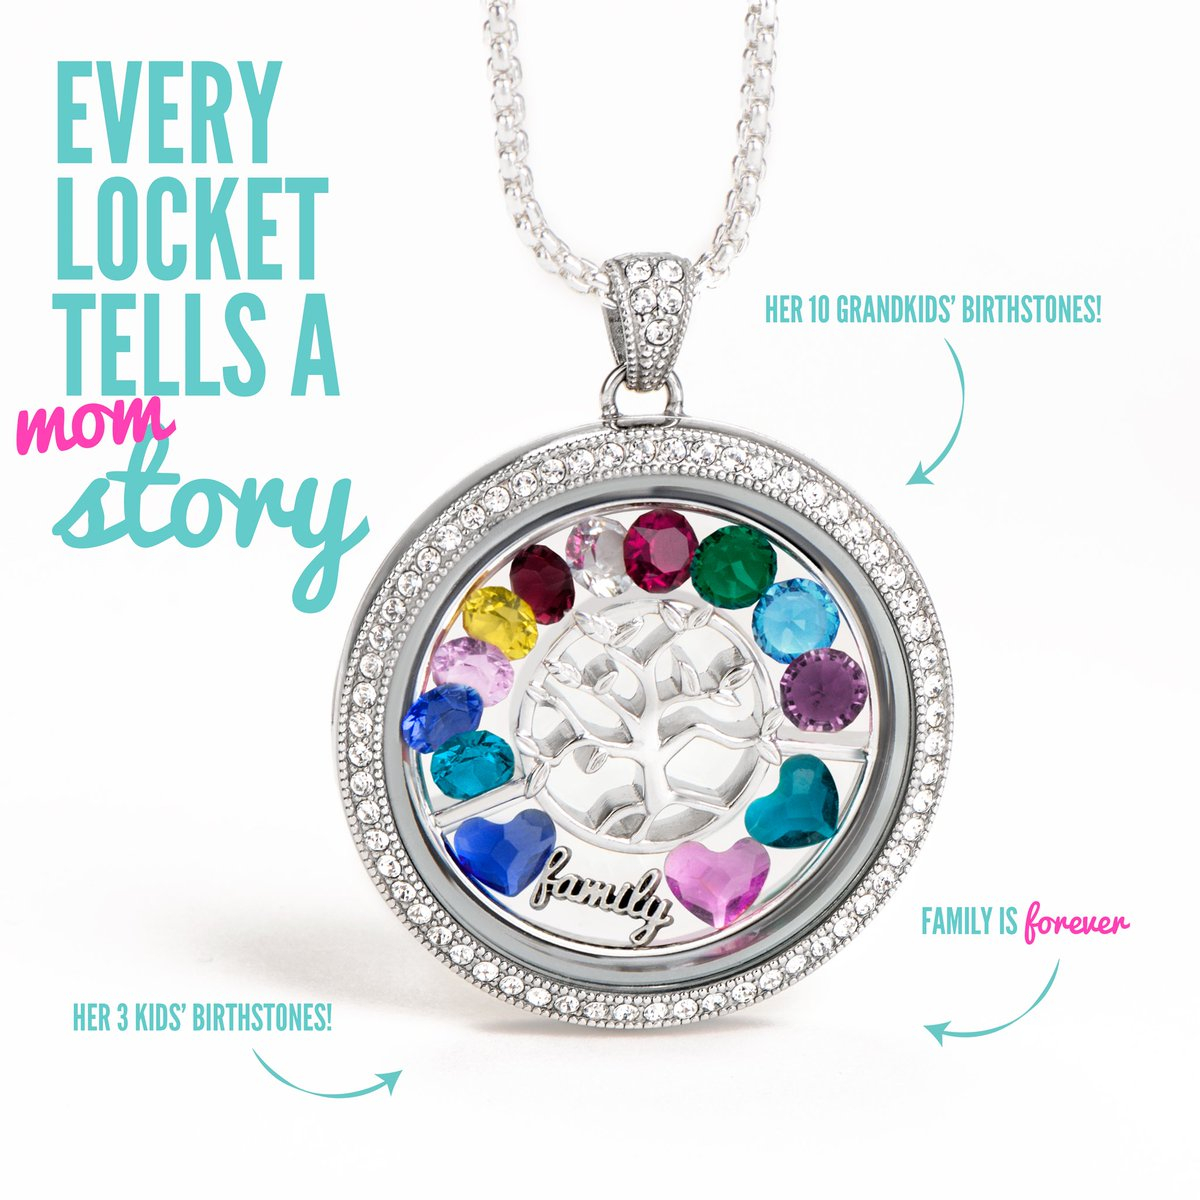 Origami Owl Family Origami Owl On Twitter Every Legacy Locket Holds A Special Story